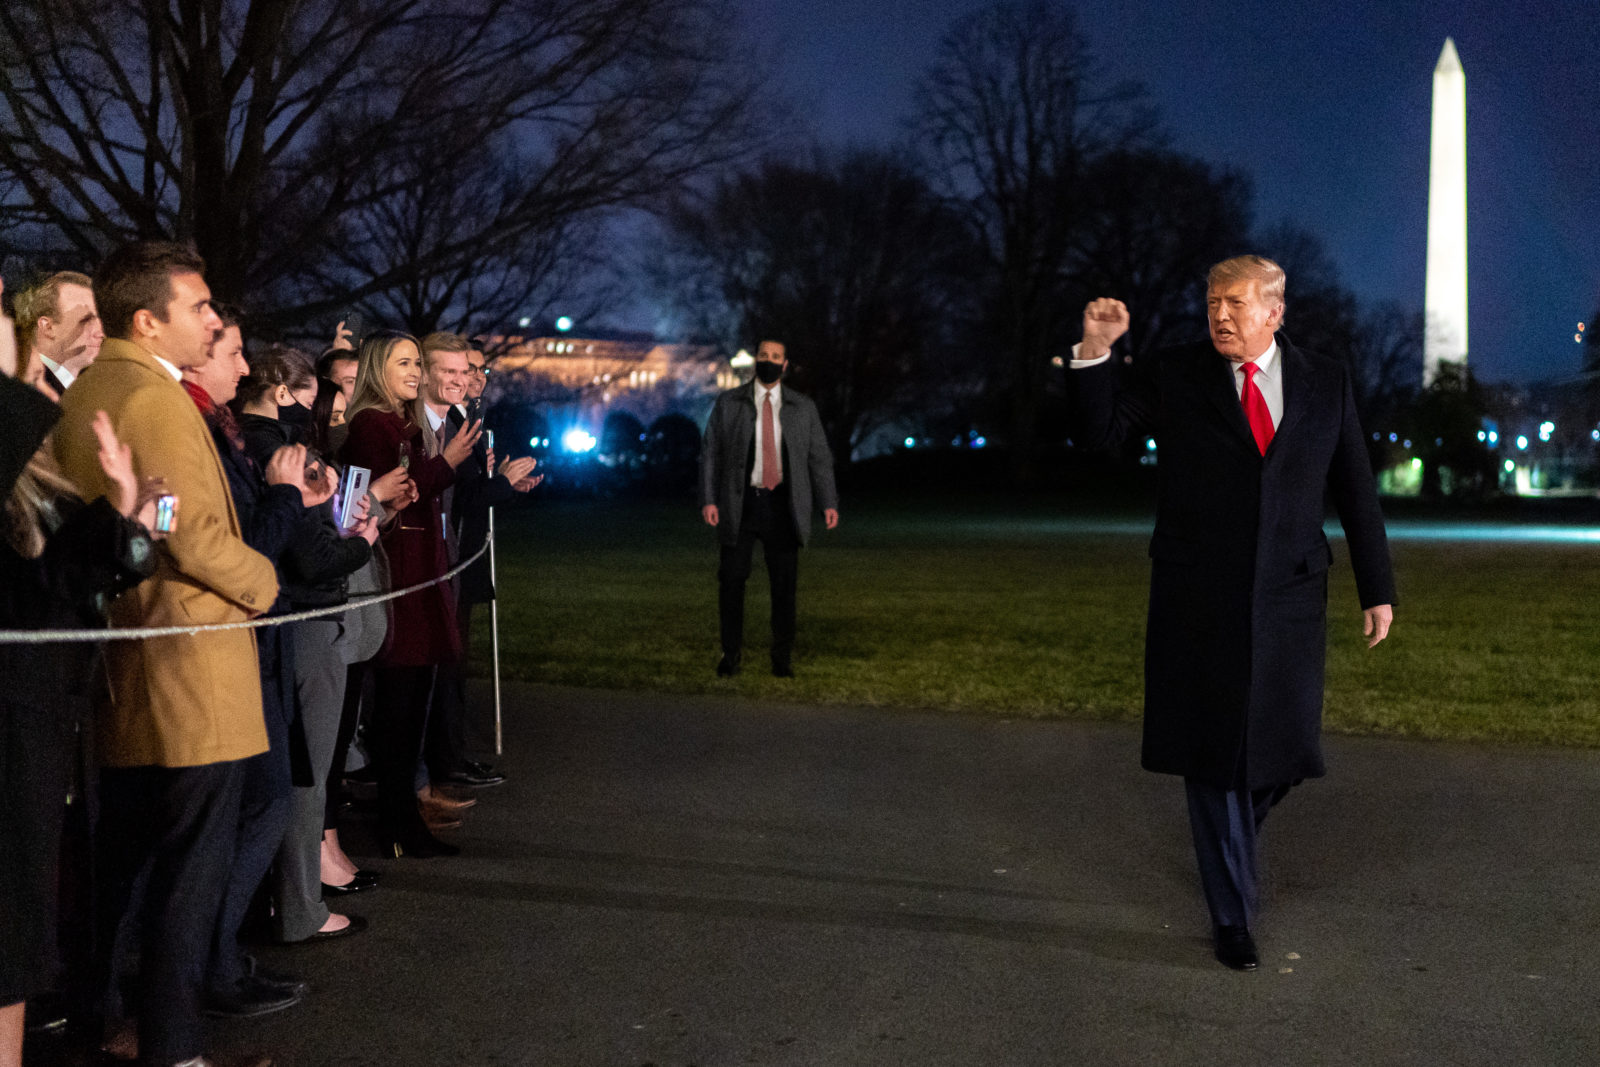 President Donald J. Trump gestures to White House staff with a fist pump after disembarking Marine One on the South Lawn of the White House Tuesday, Jan. 12, 2021, following his trip to Texas.